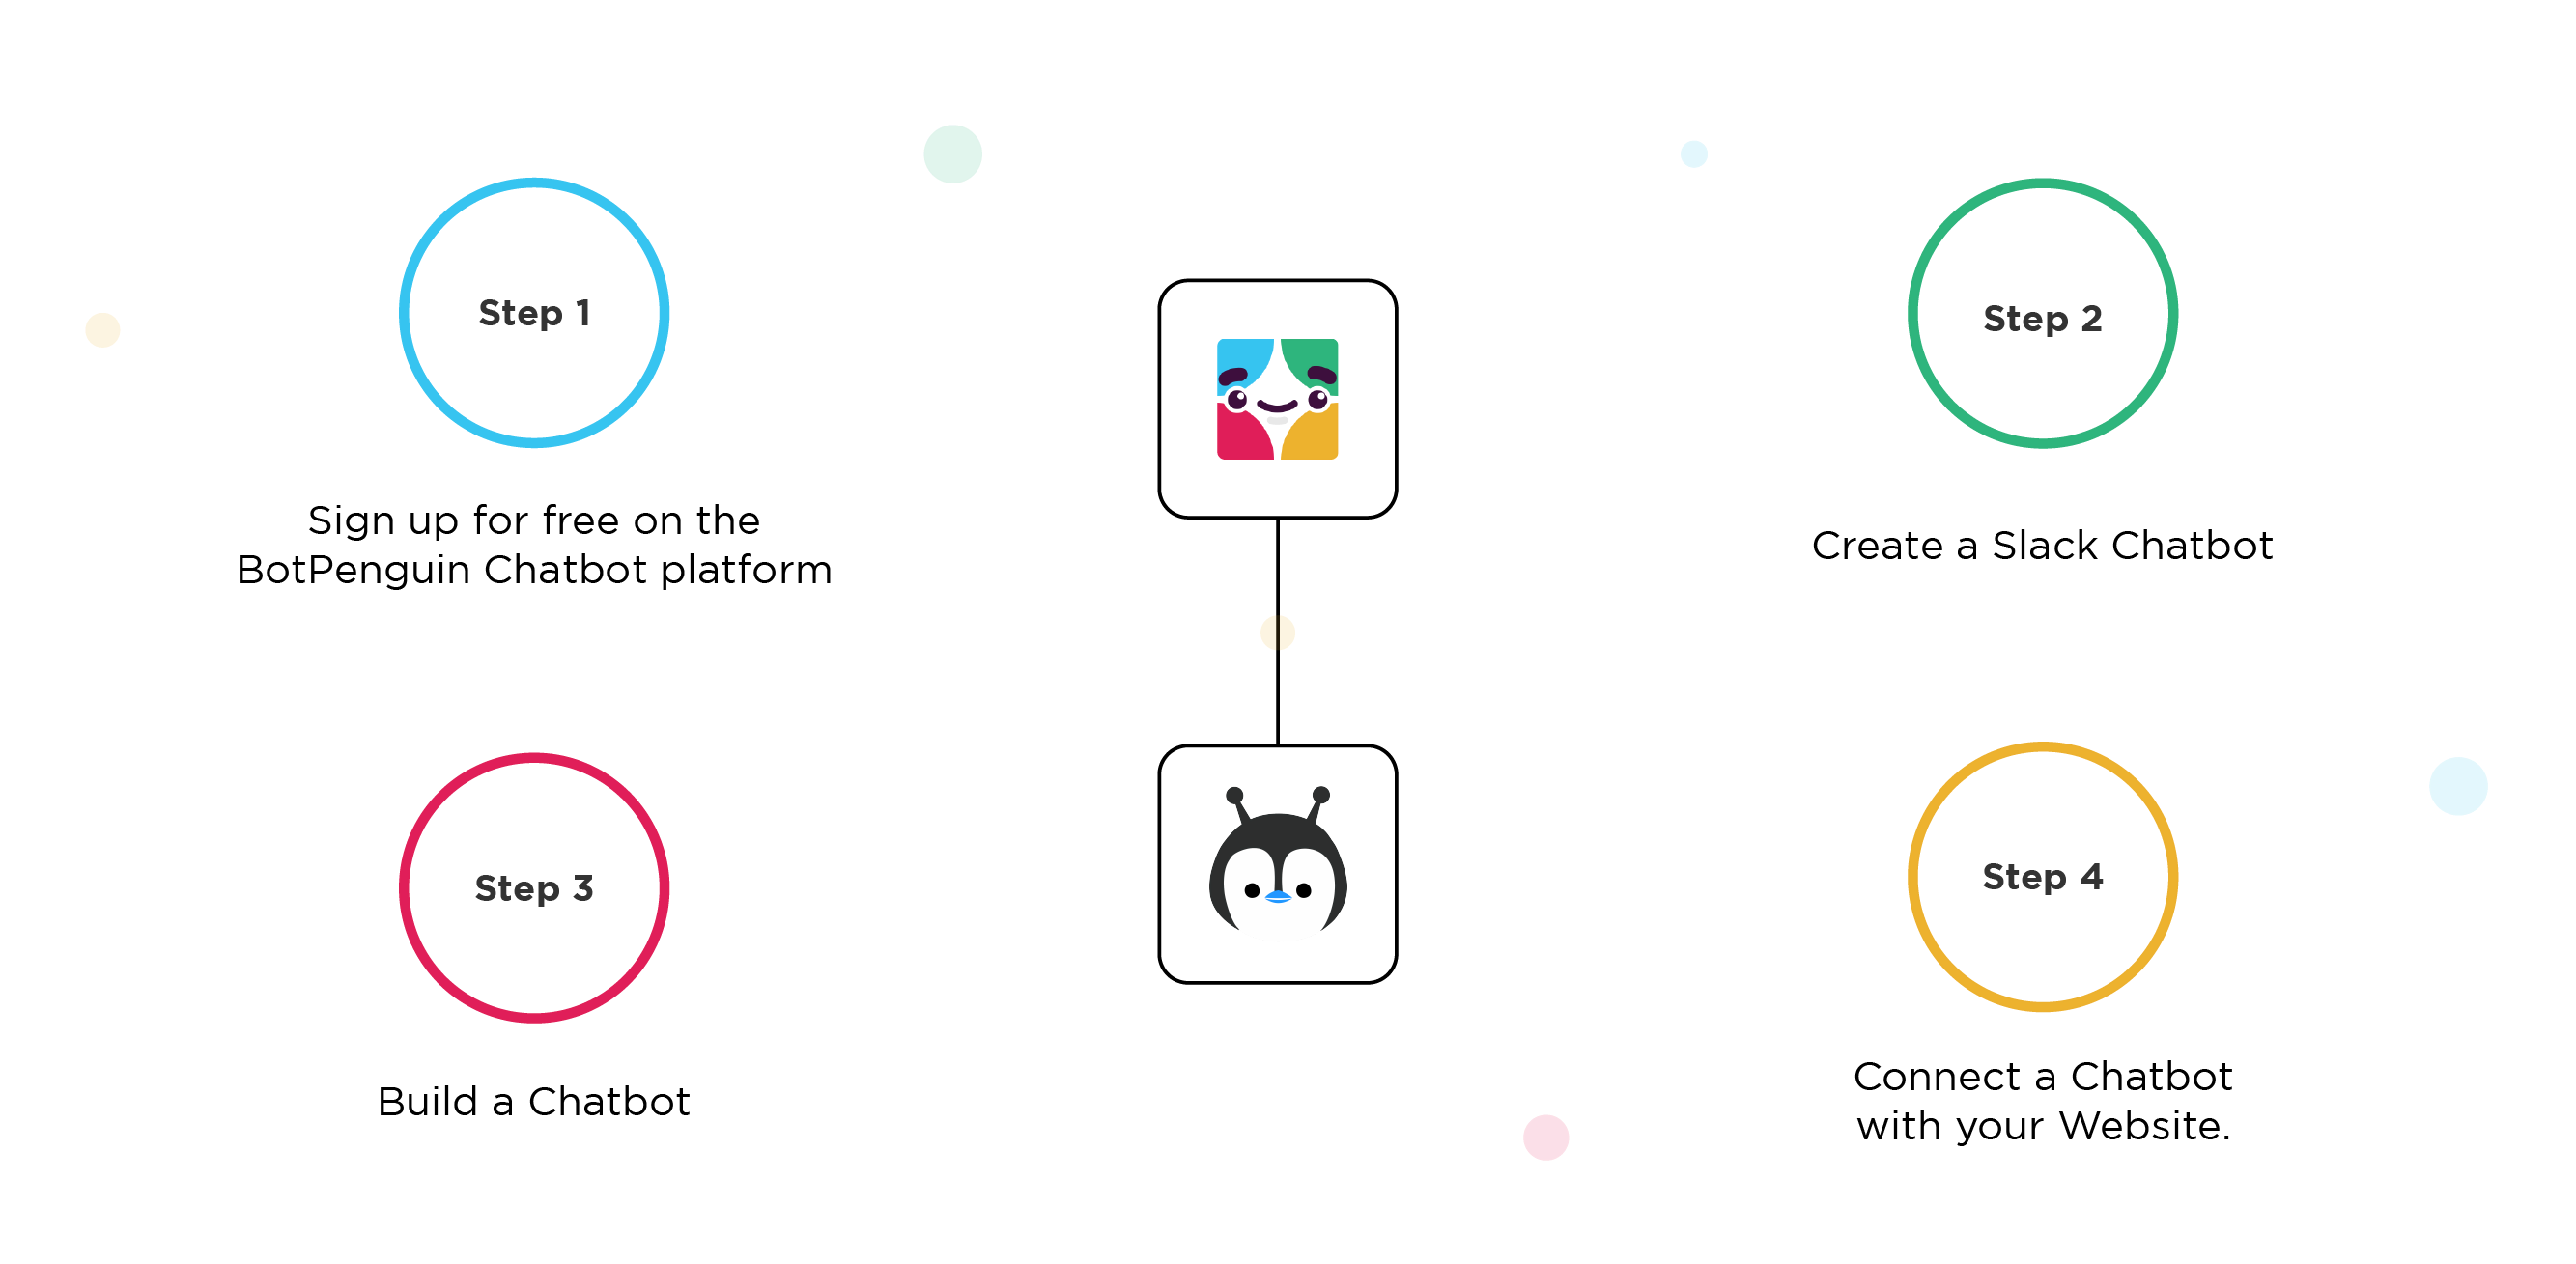 How to create a slack chatbot with BotPenguin